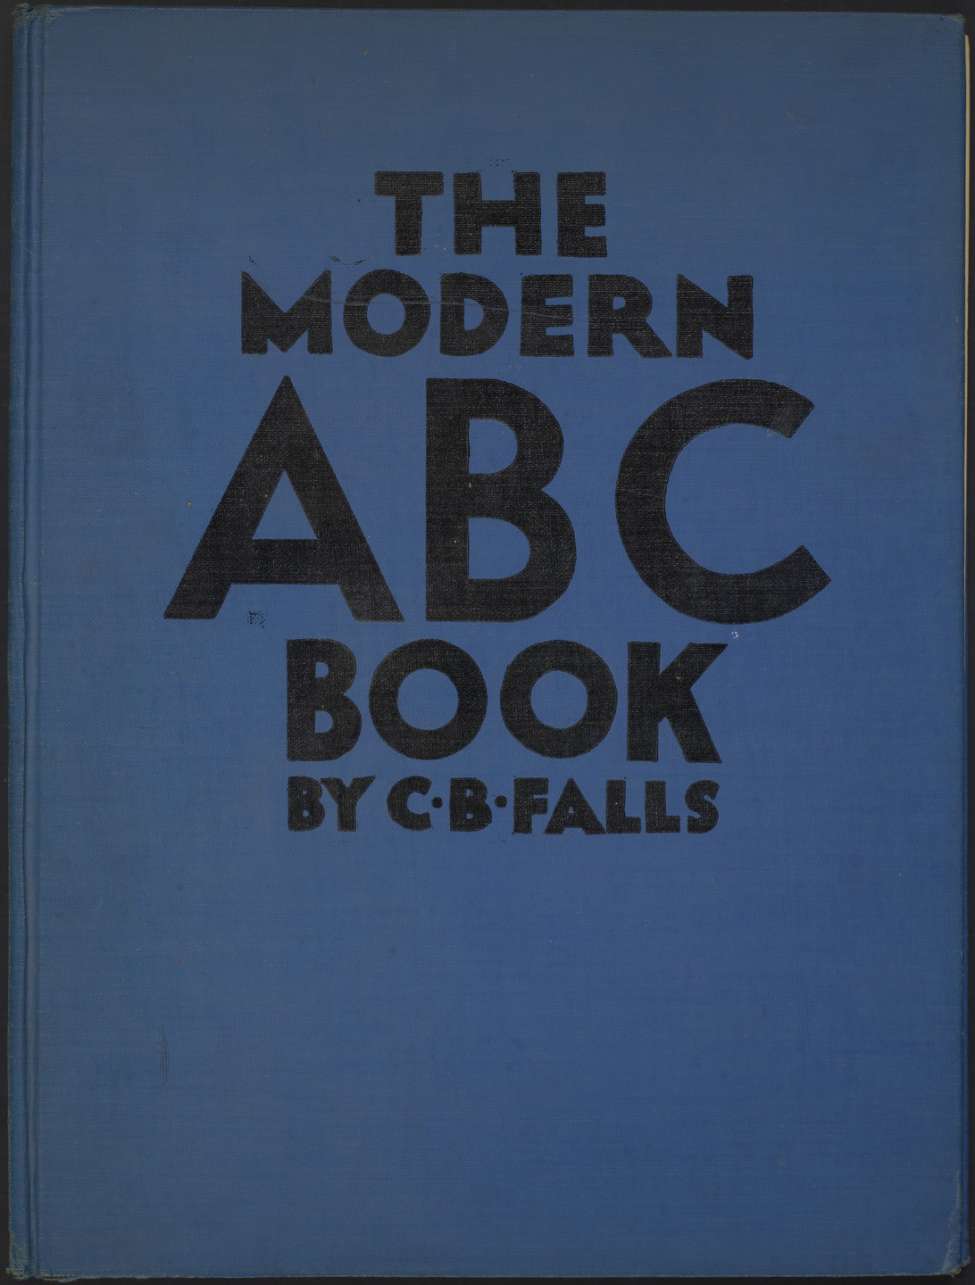 Comic Book Cover For The Modern ABC Book